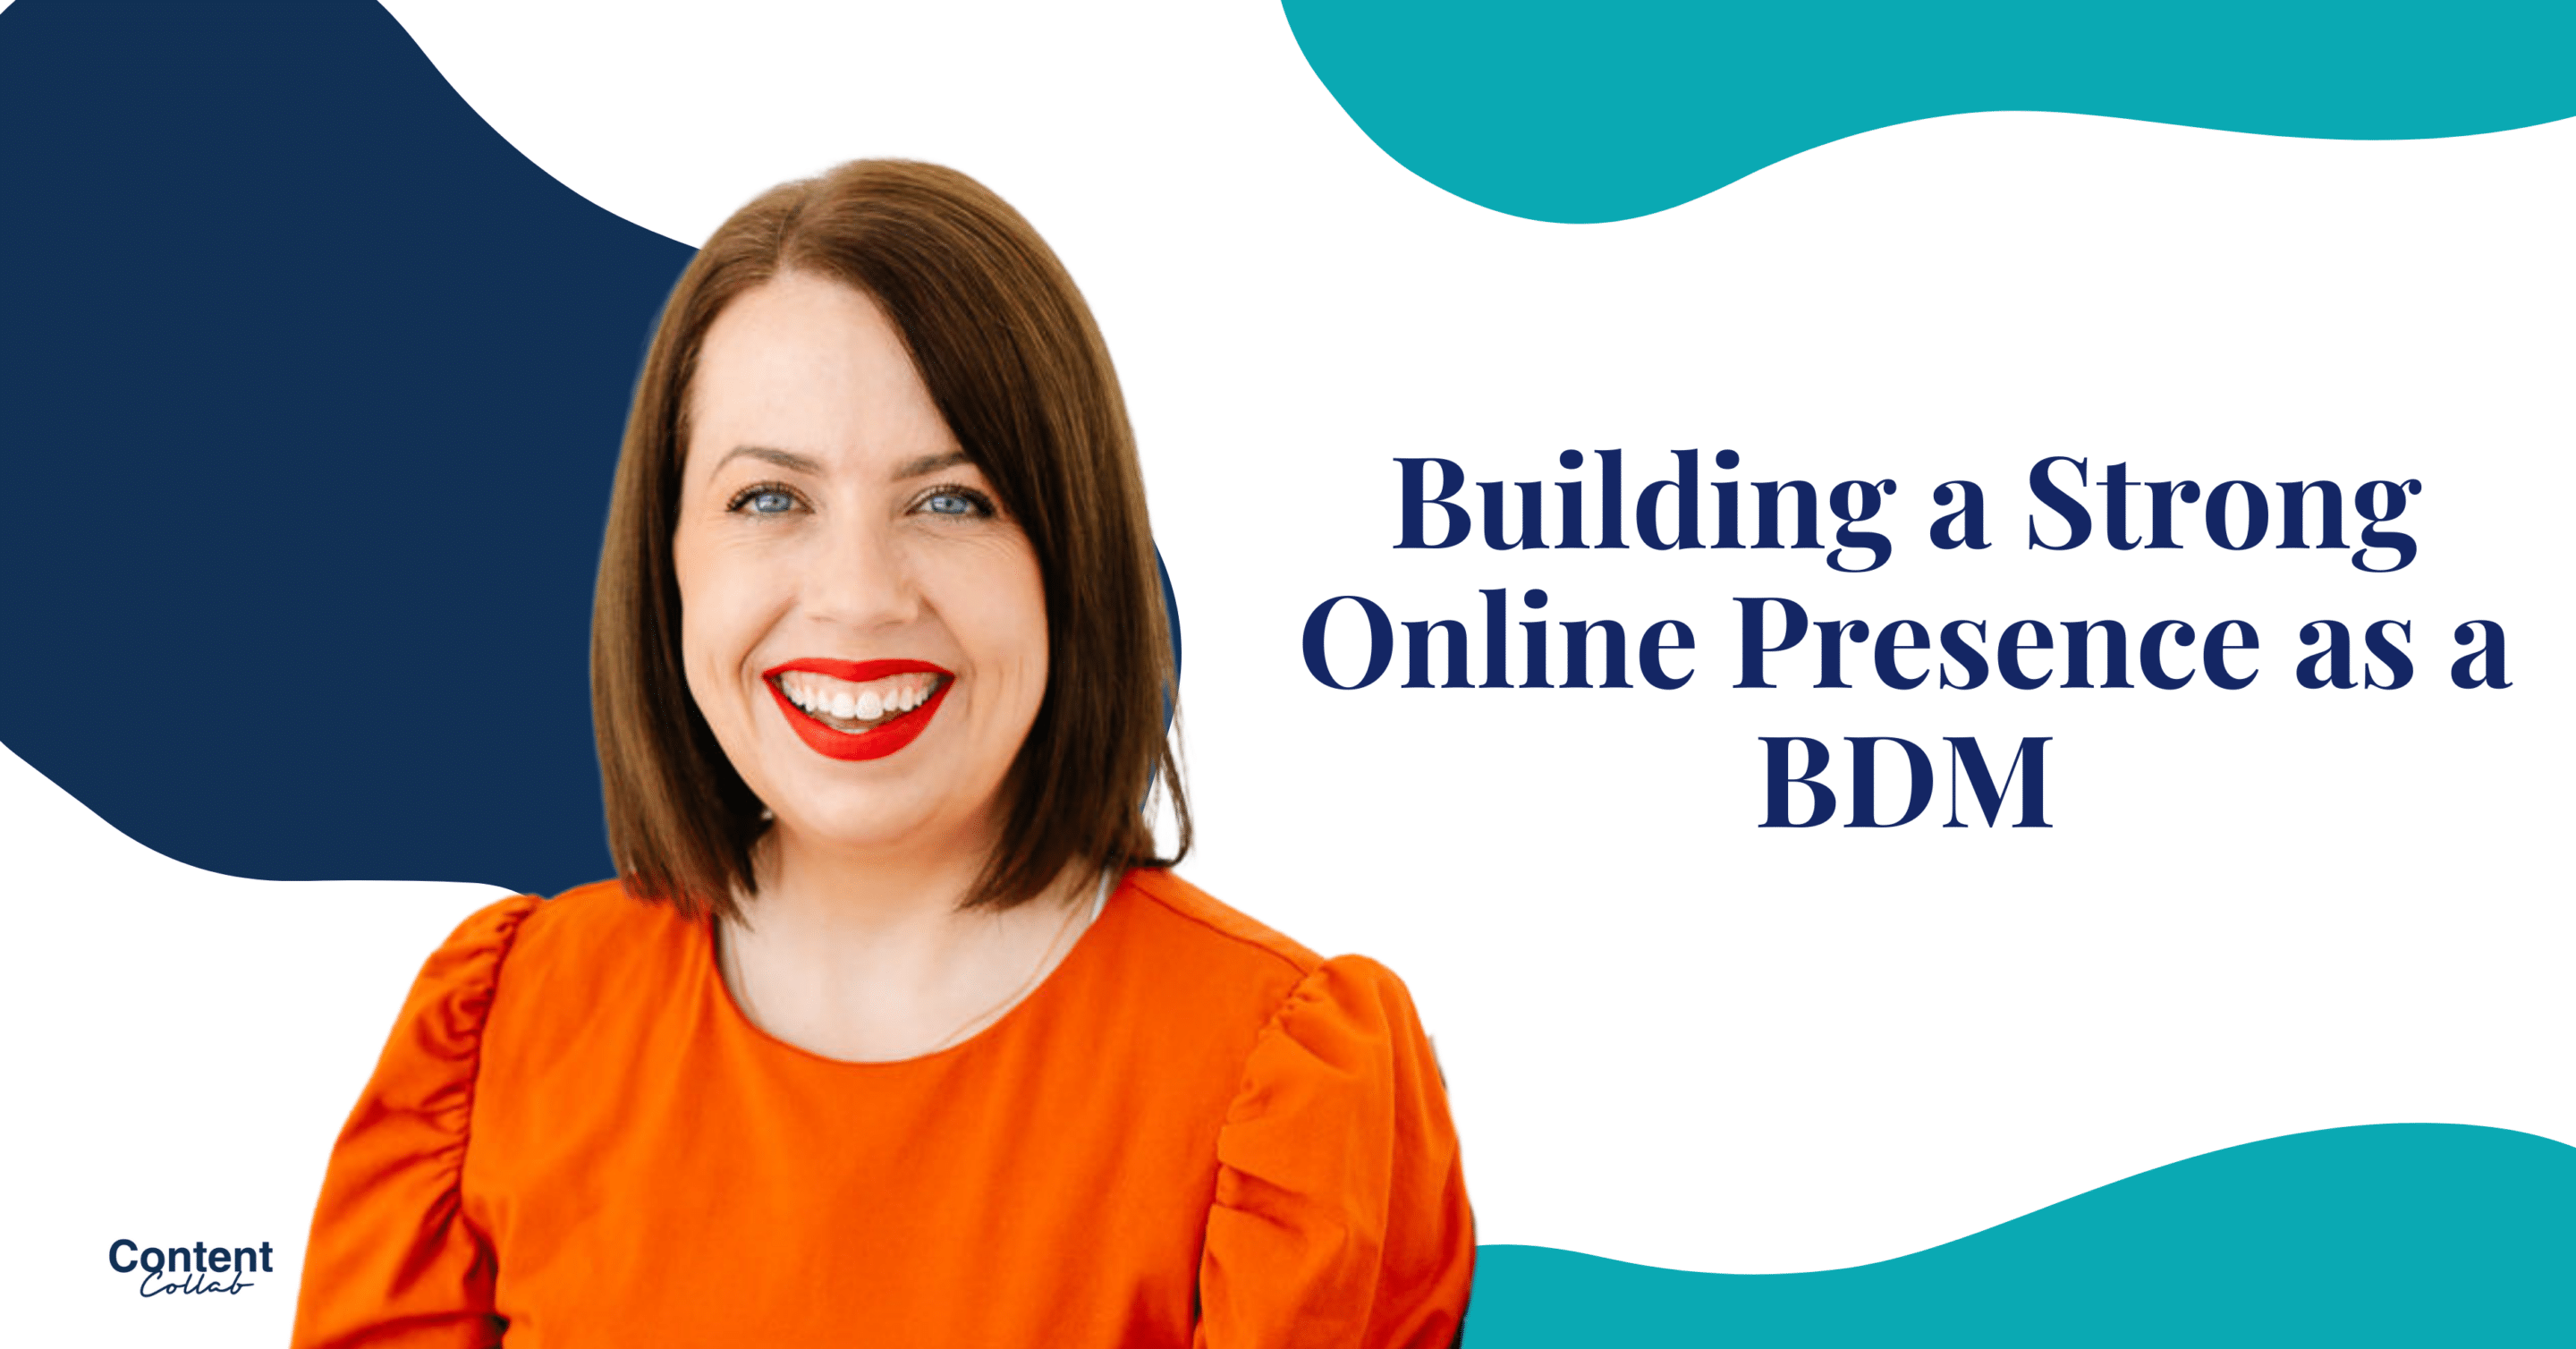 Building a Strong Online Presence as a Business Development Manager